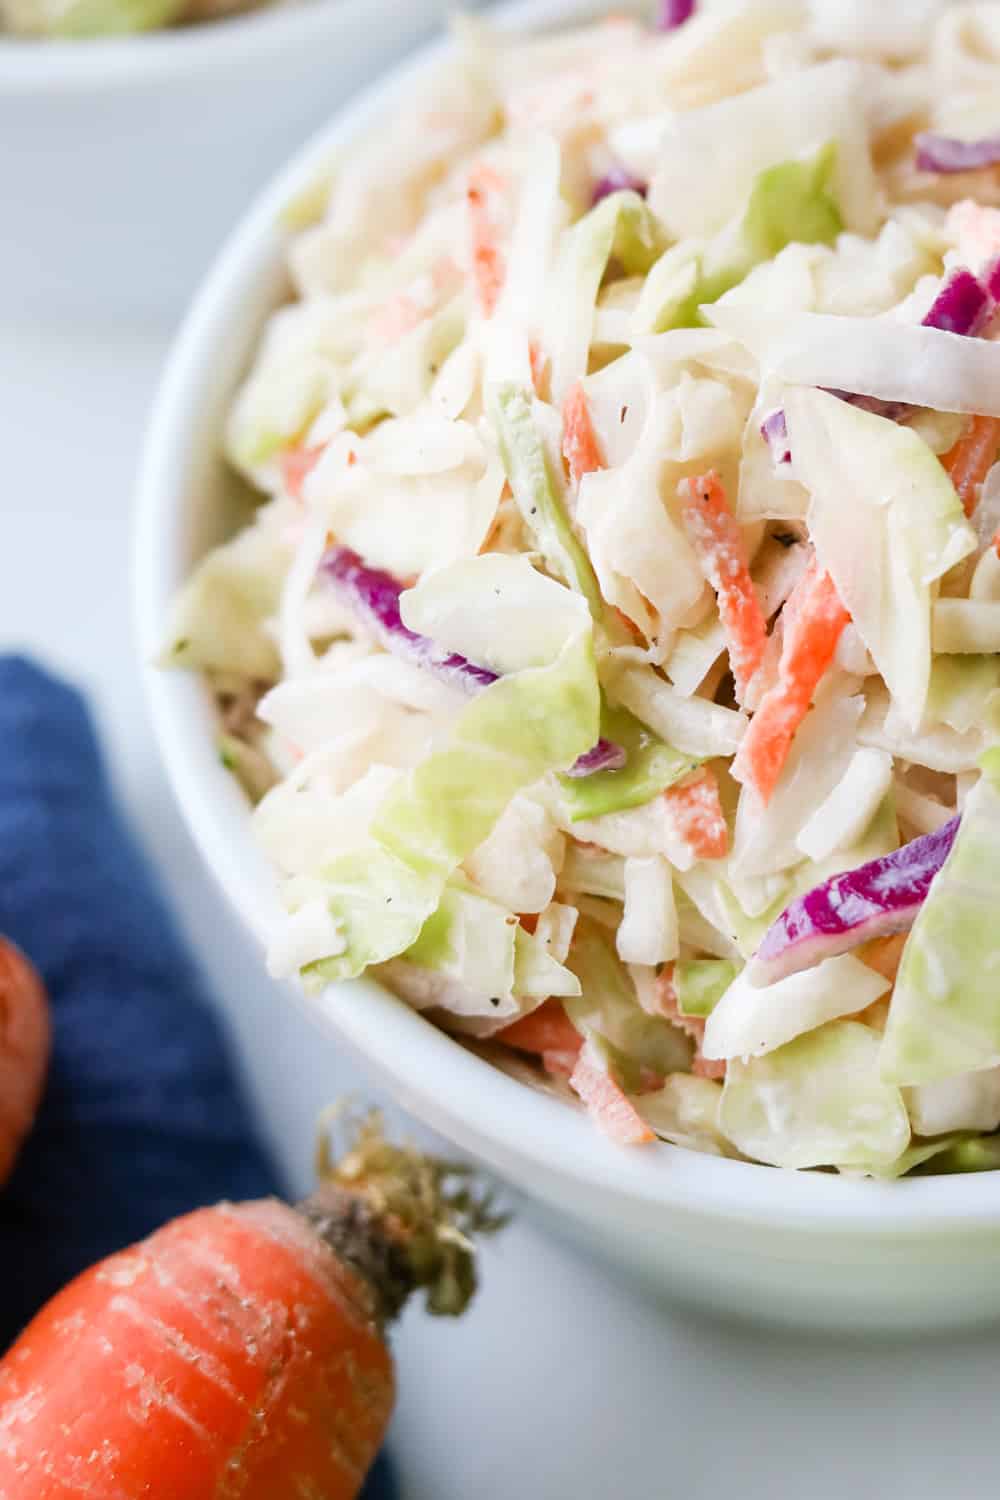 Keto coleslaw in a white bowl with a blue napkin, and carrots next to it.